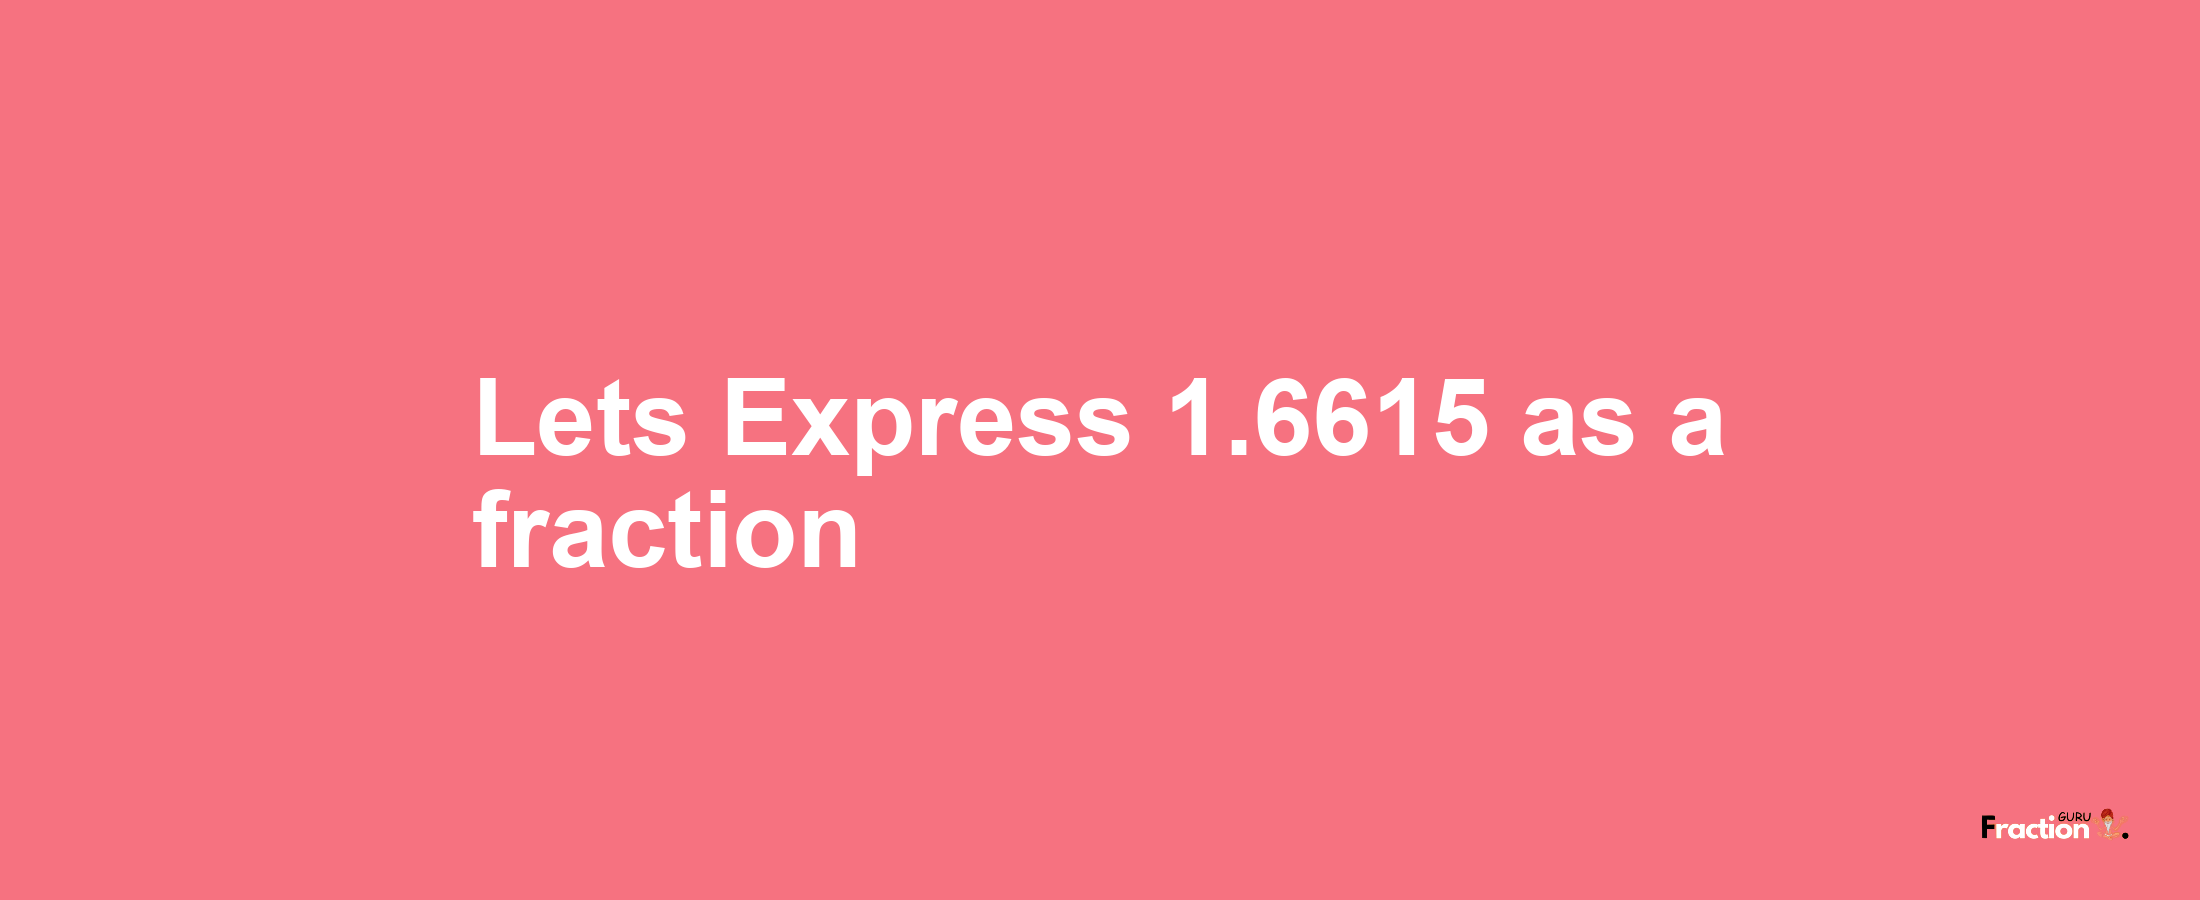 Lets Express 1.6615 as afraction